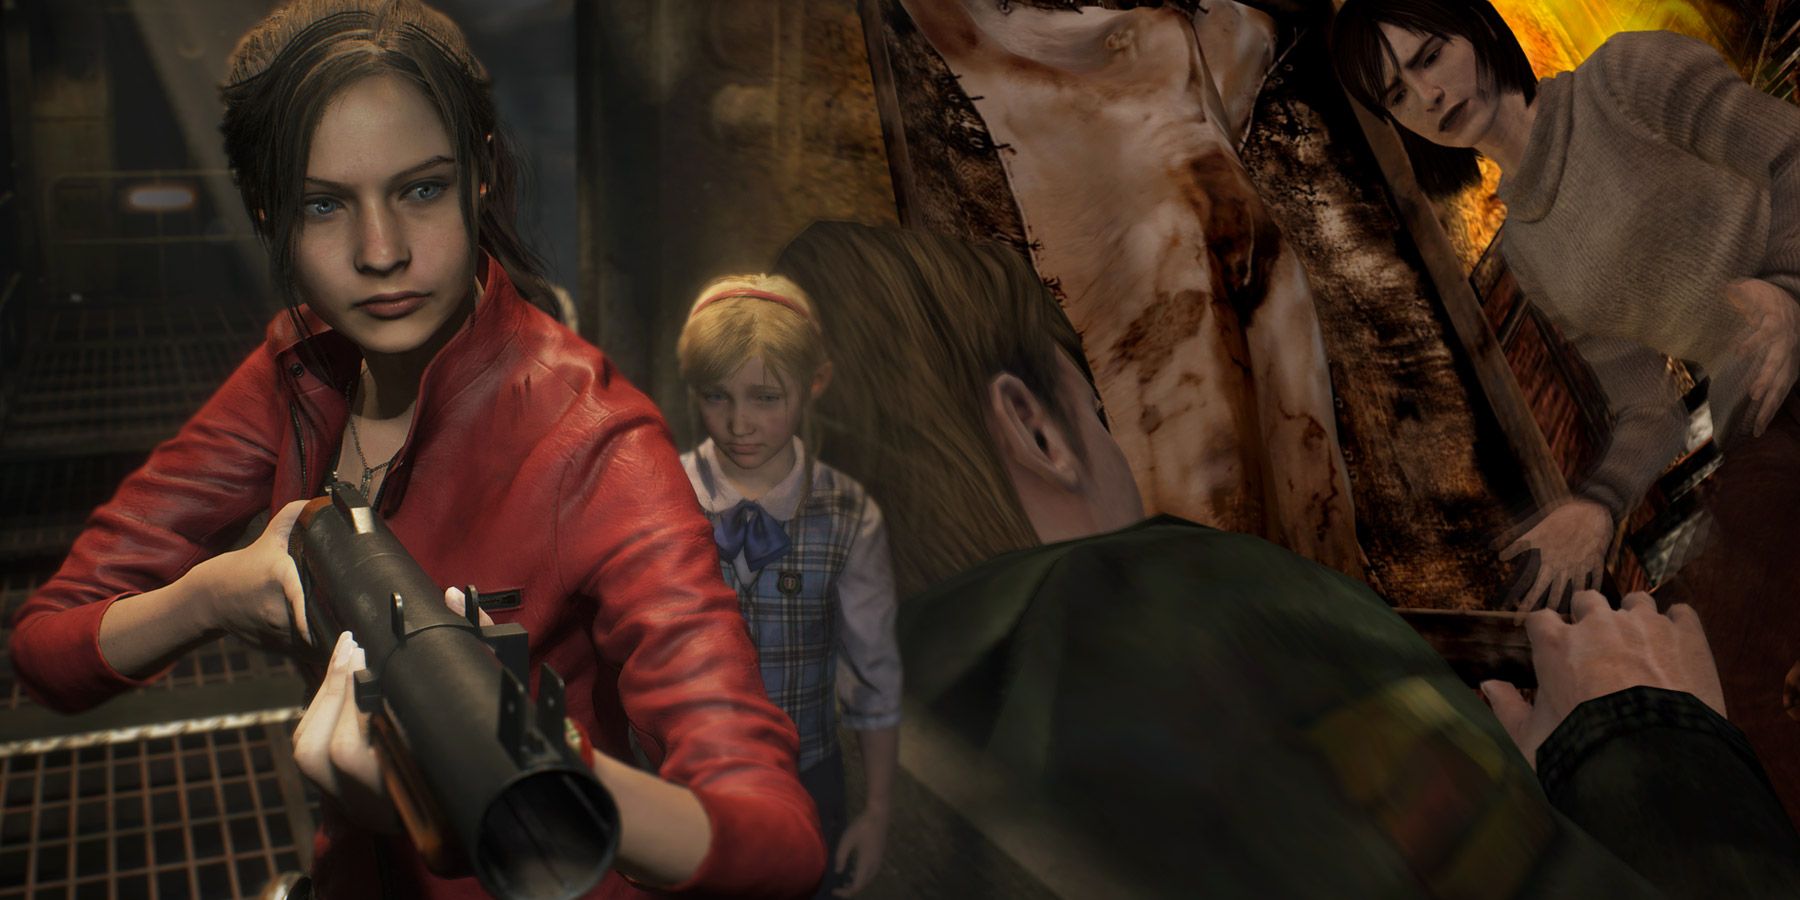 Silent Hill 2 movie confirmed based on the video game sequel